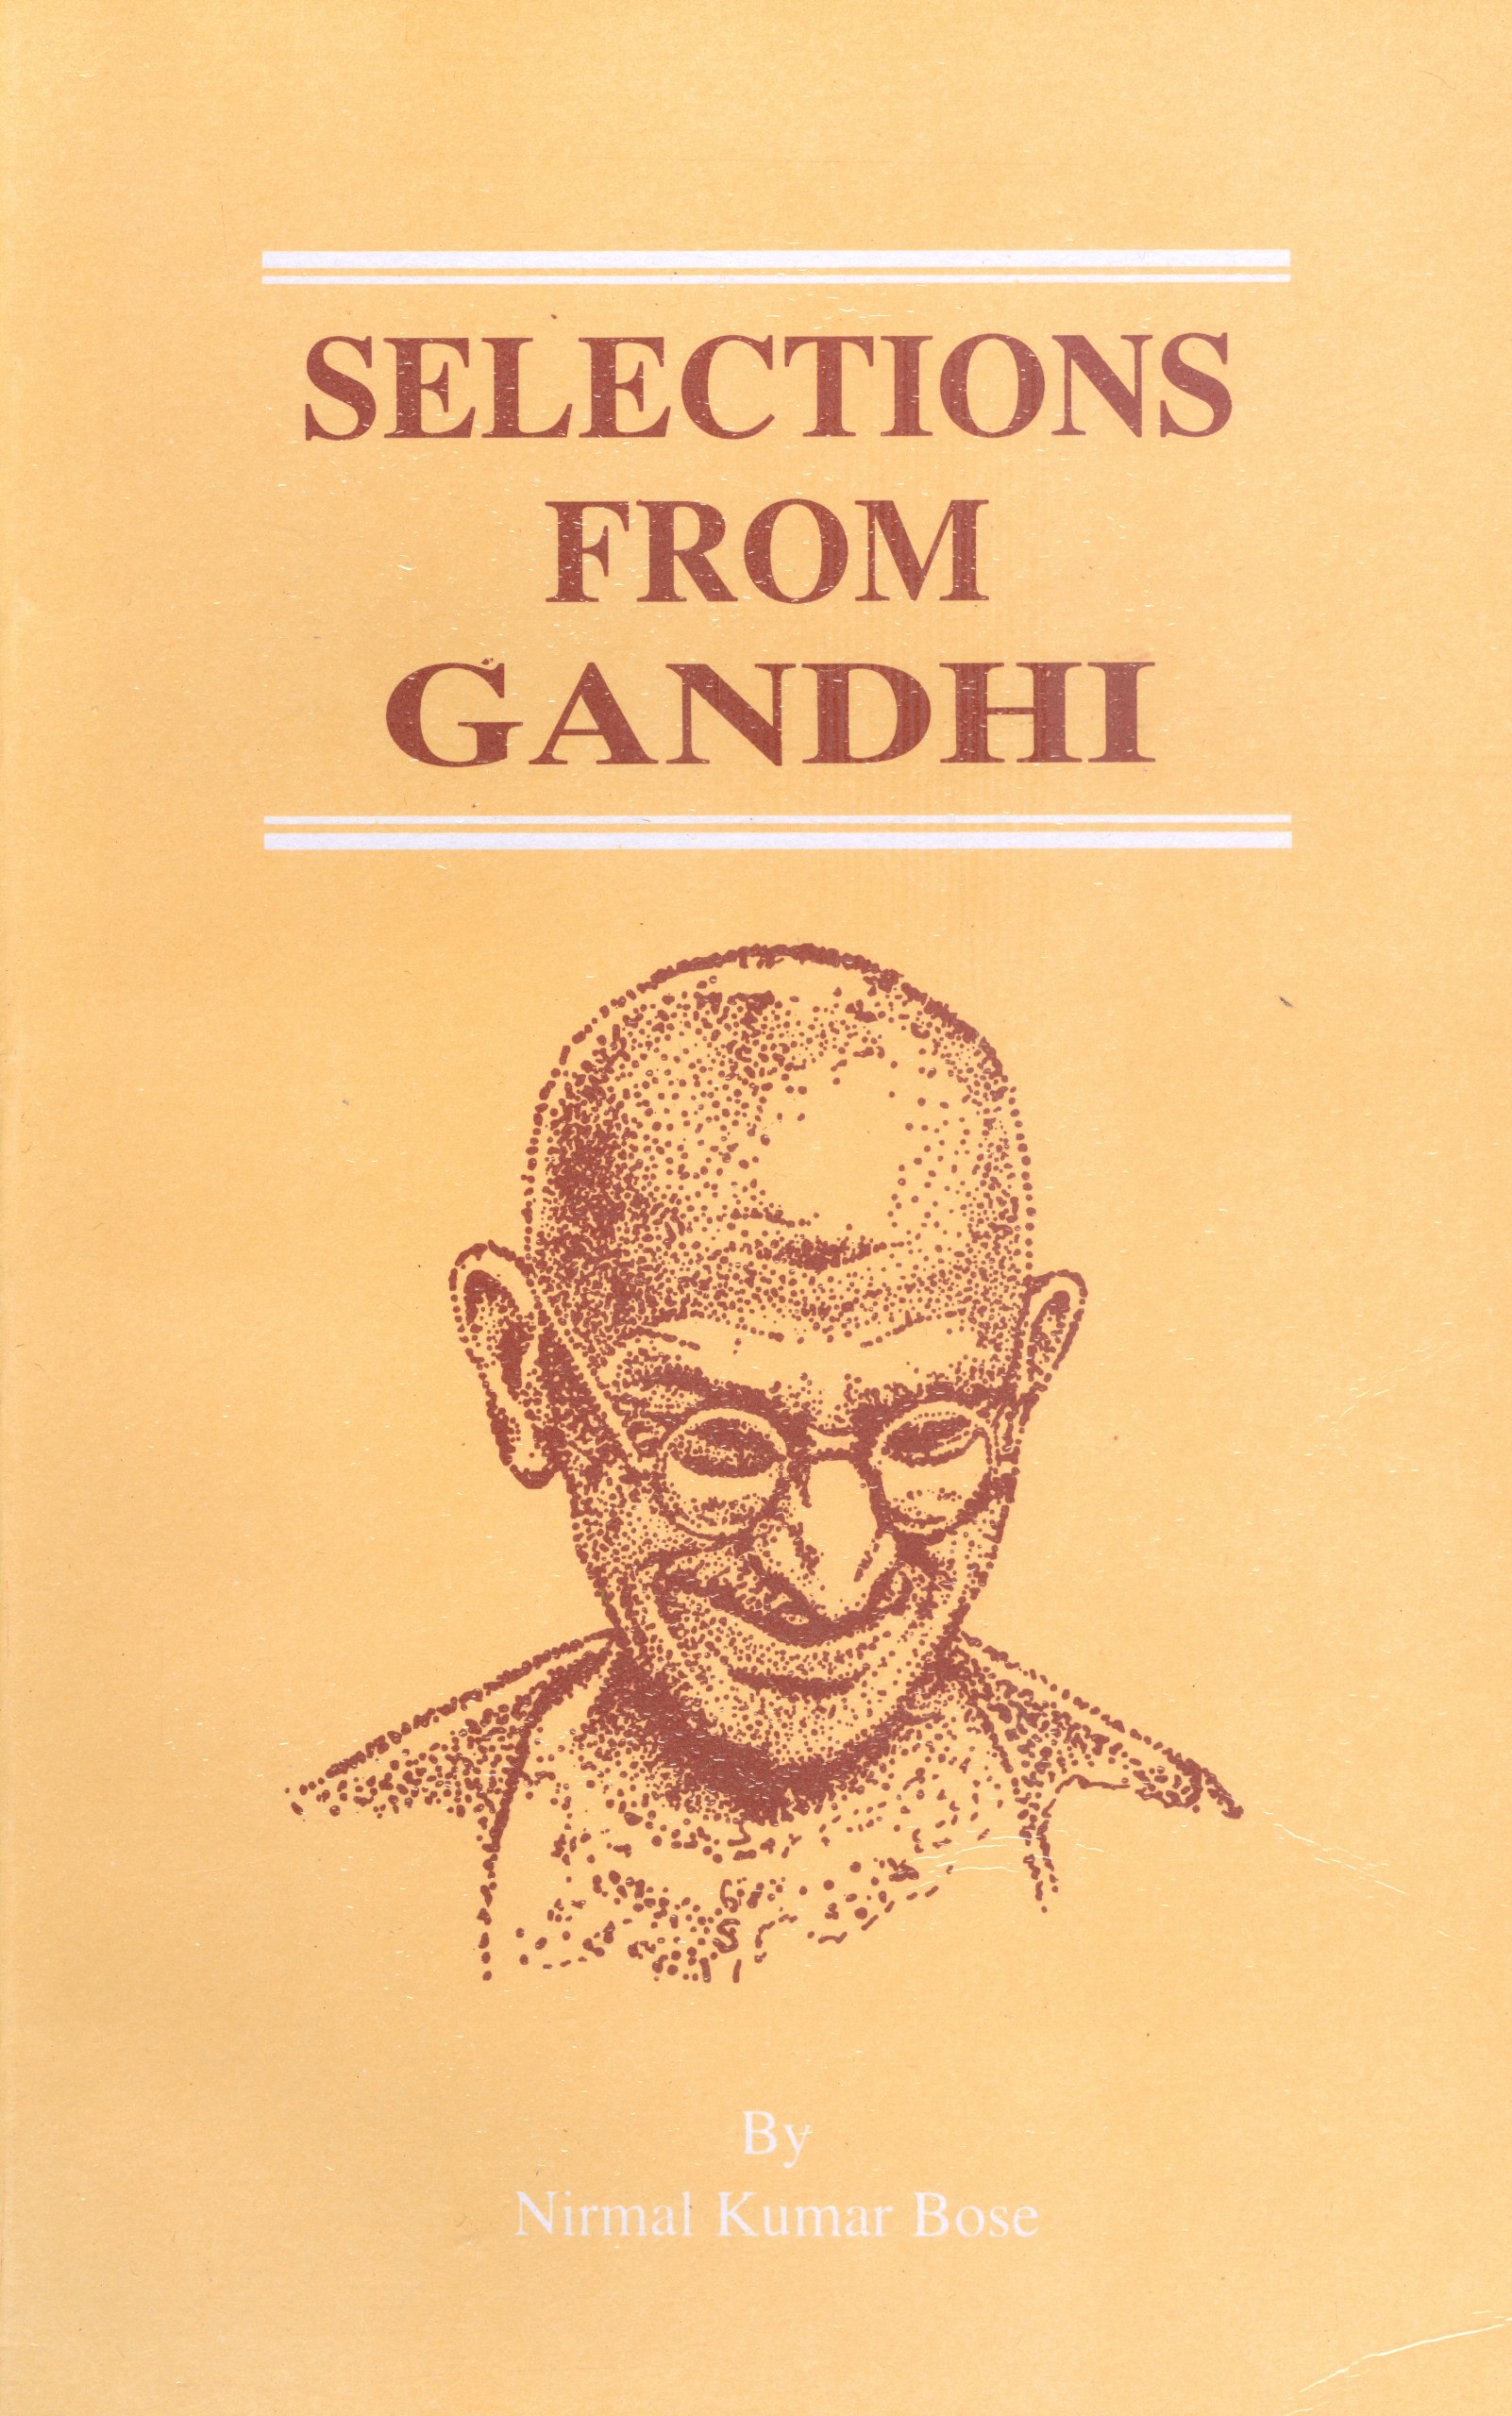 Selections From Gandhi